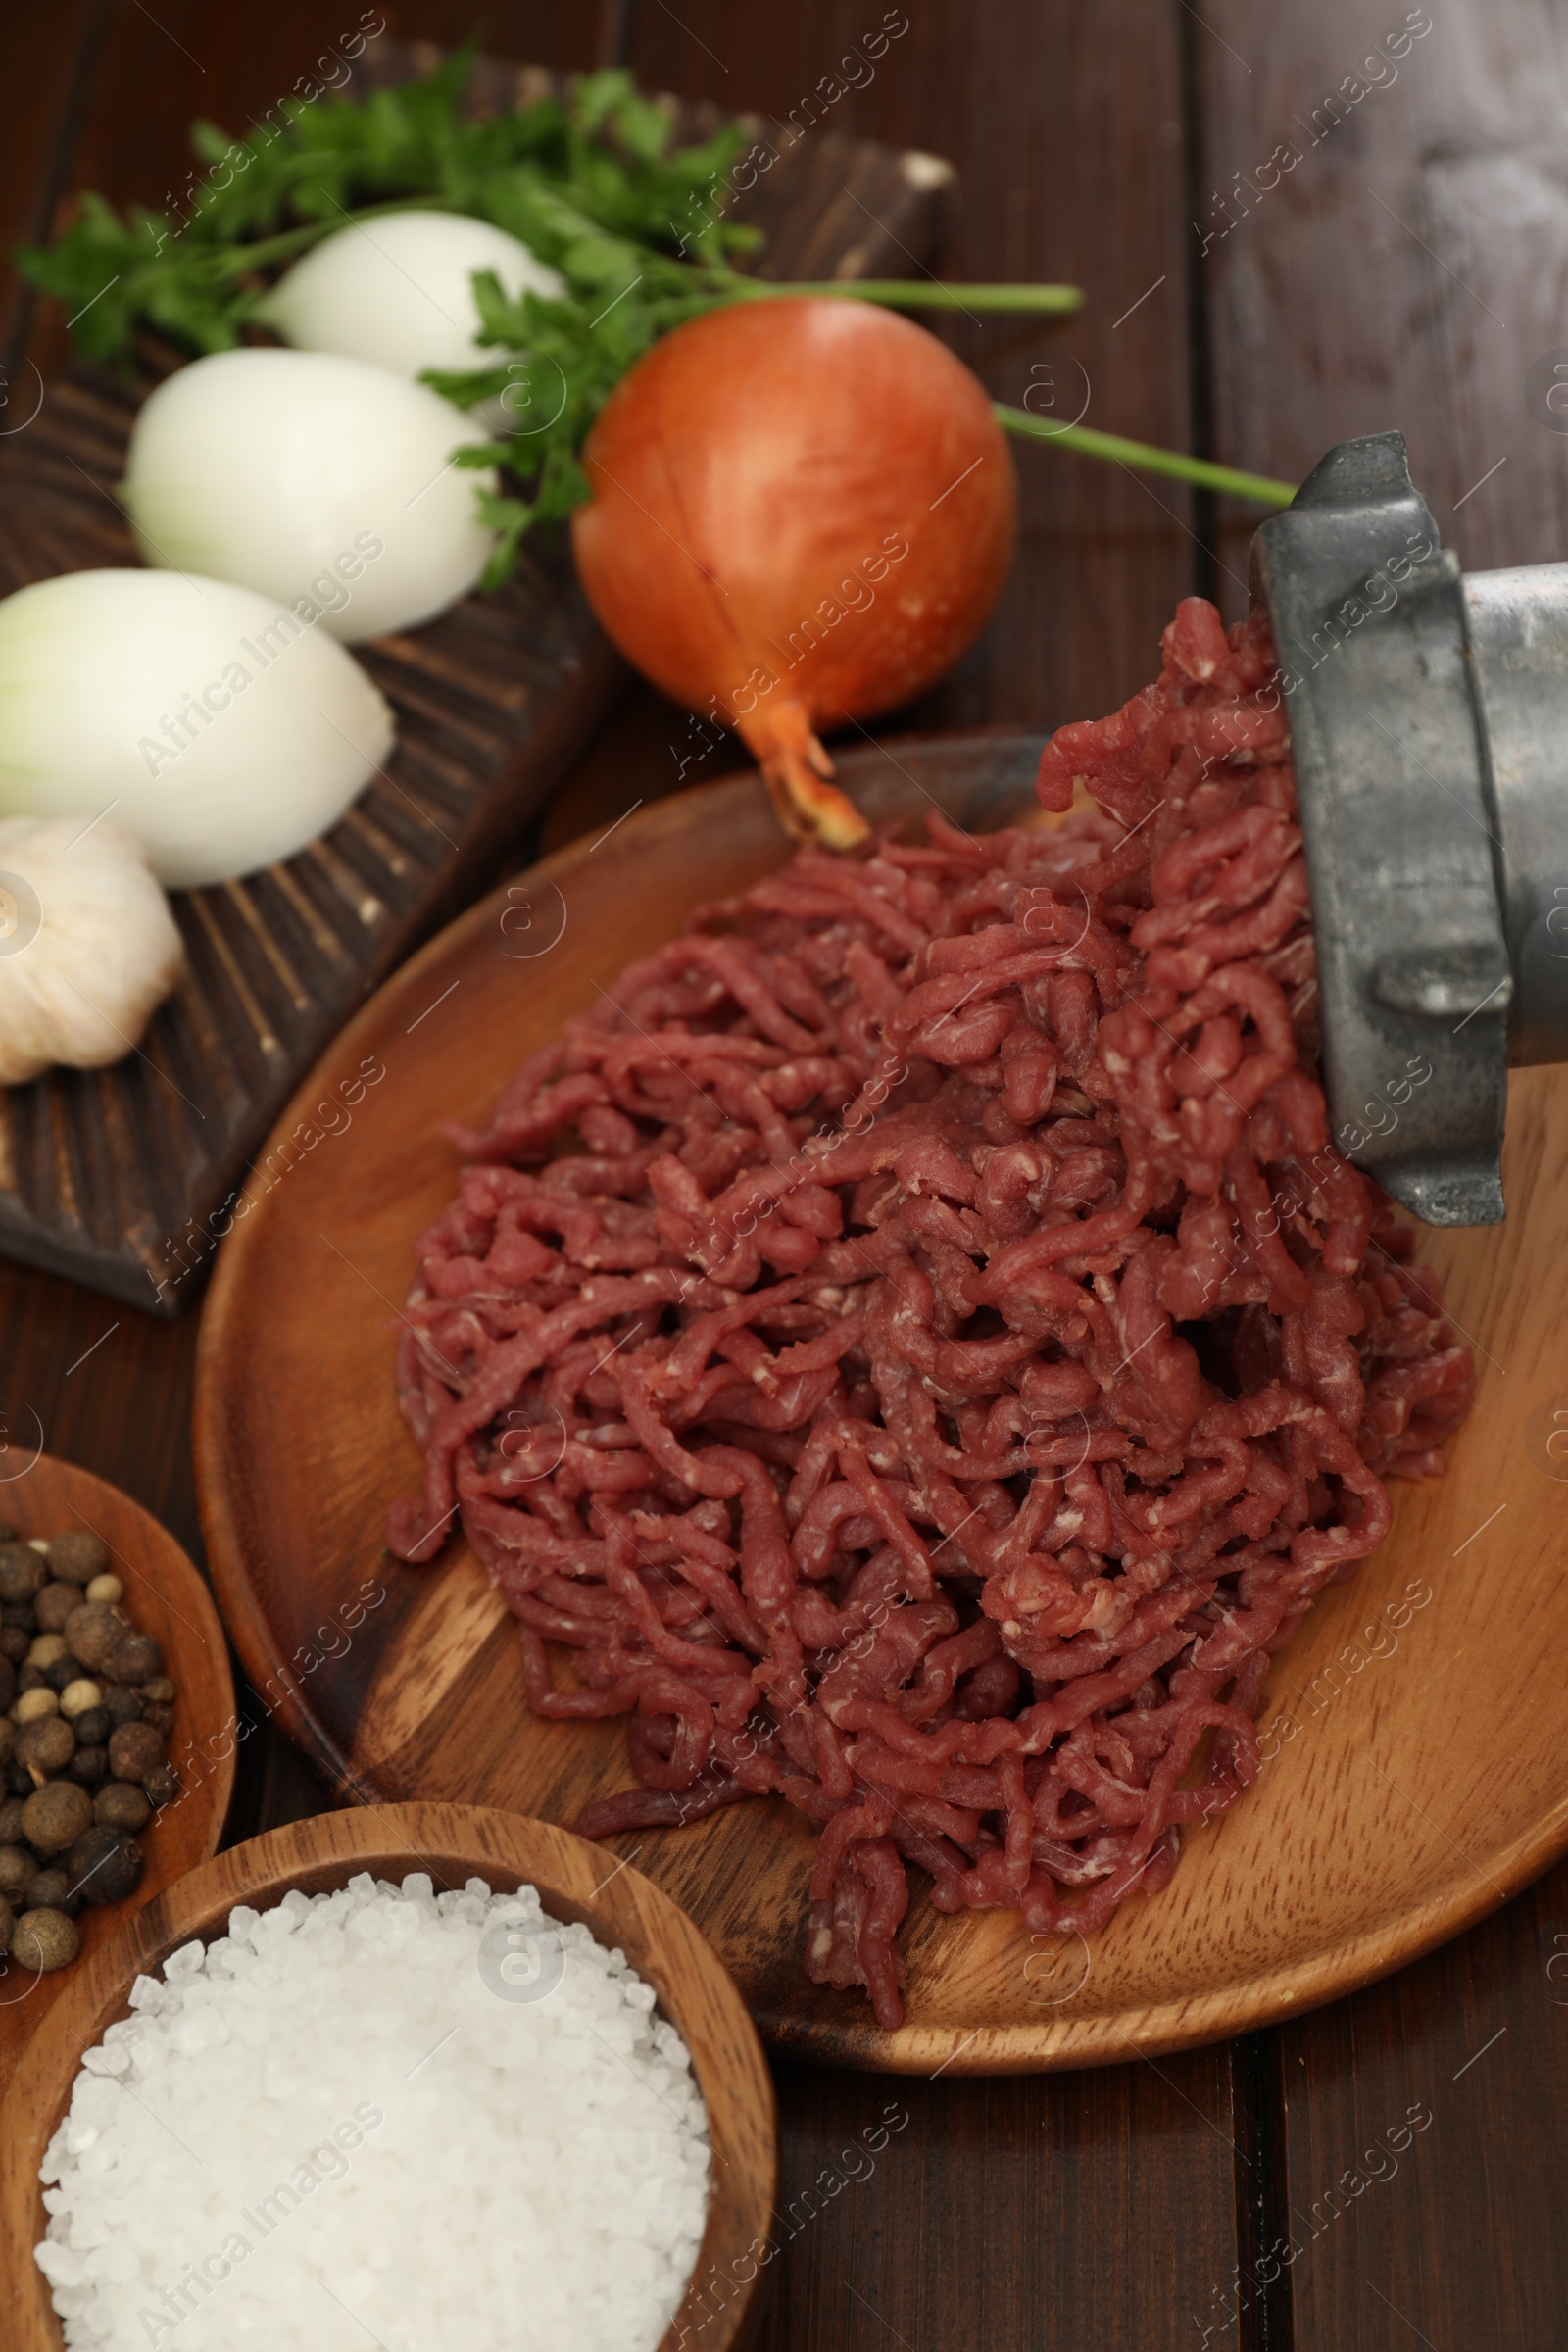 Photo of Meat grinder with beef mince, onion, parsley and spices on wooden table